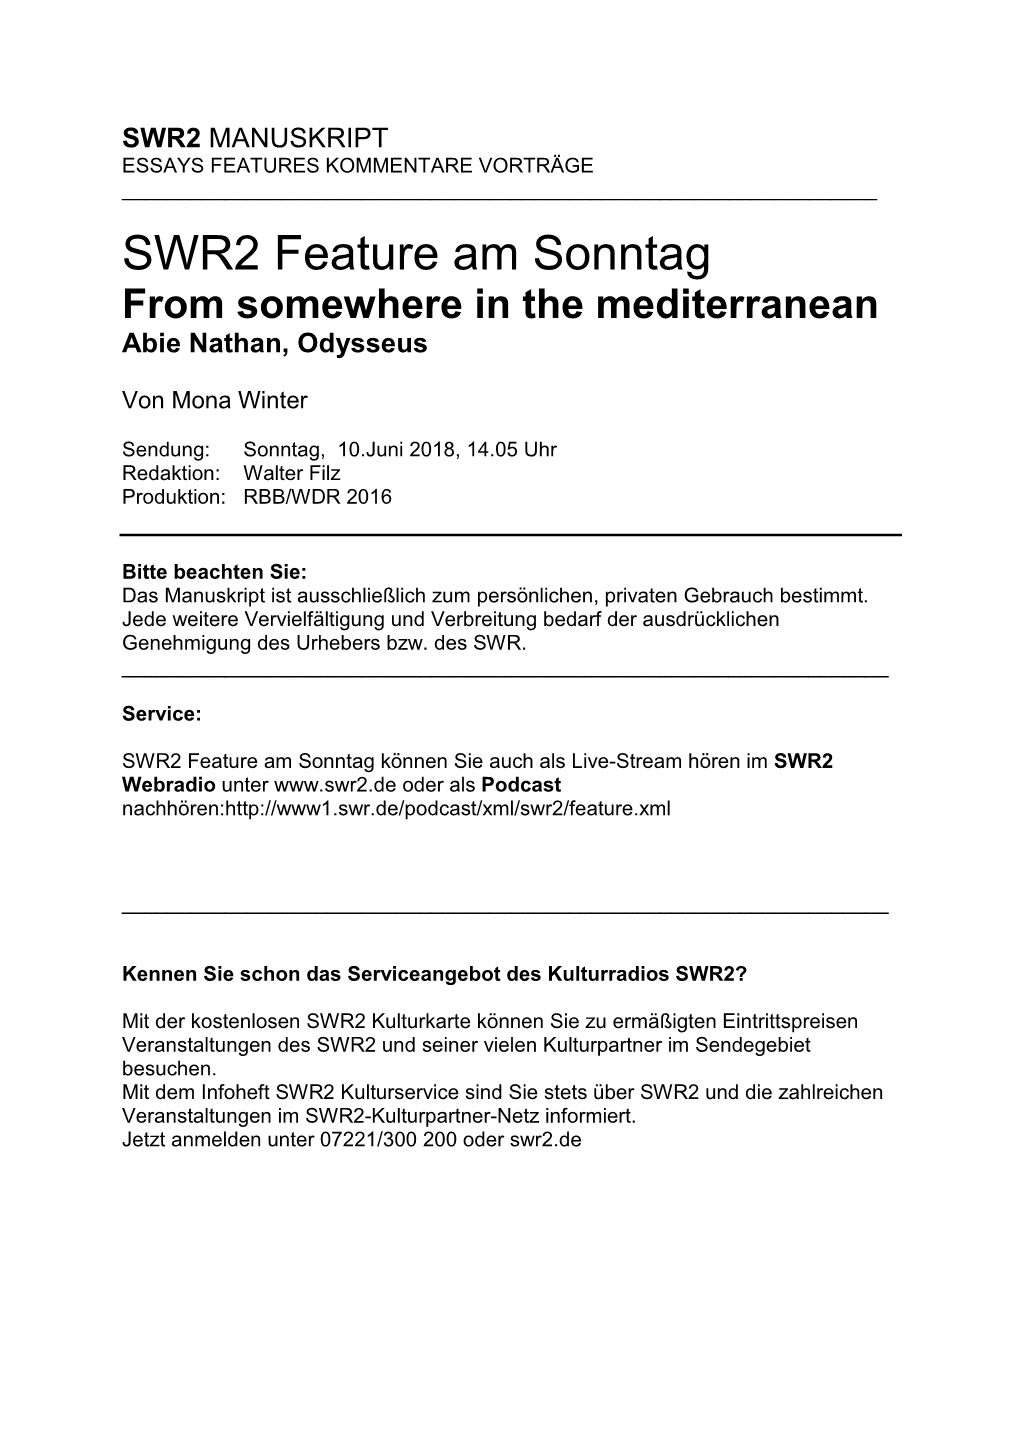 SWR2 Feature Am Sonntag from Somewhere in the Mediterranean Abie Nathan, Odysseus